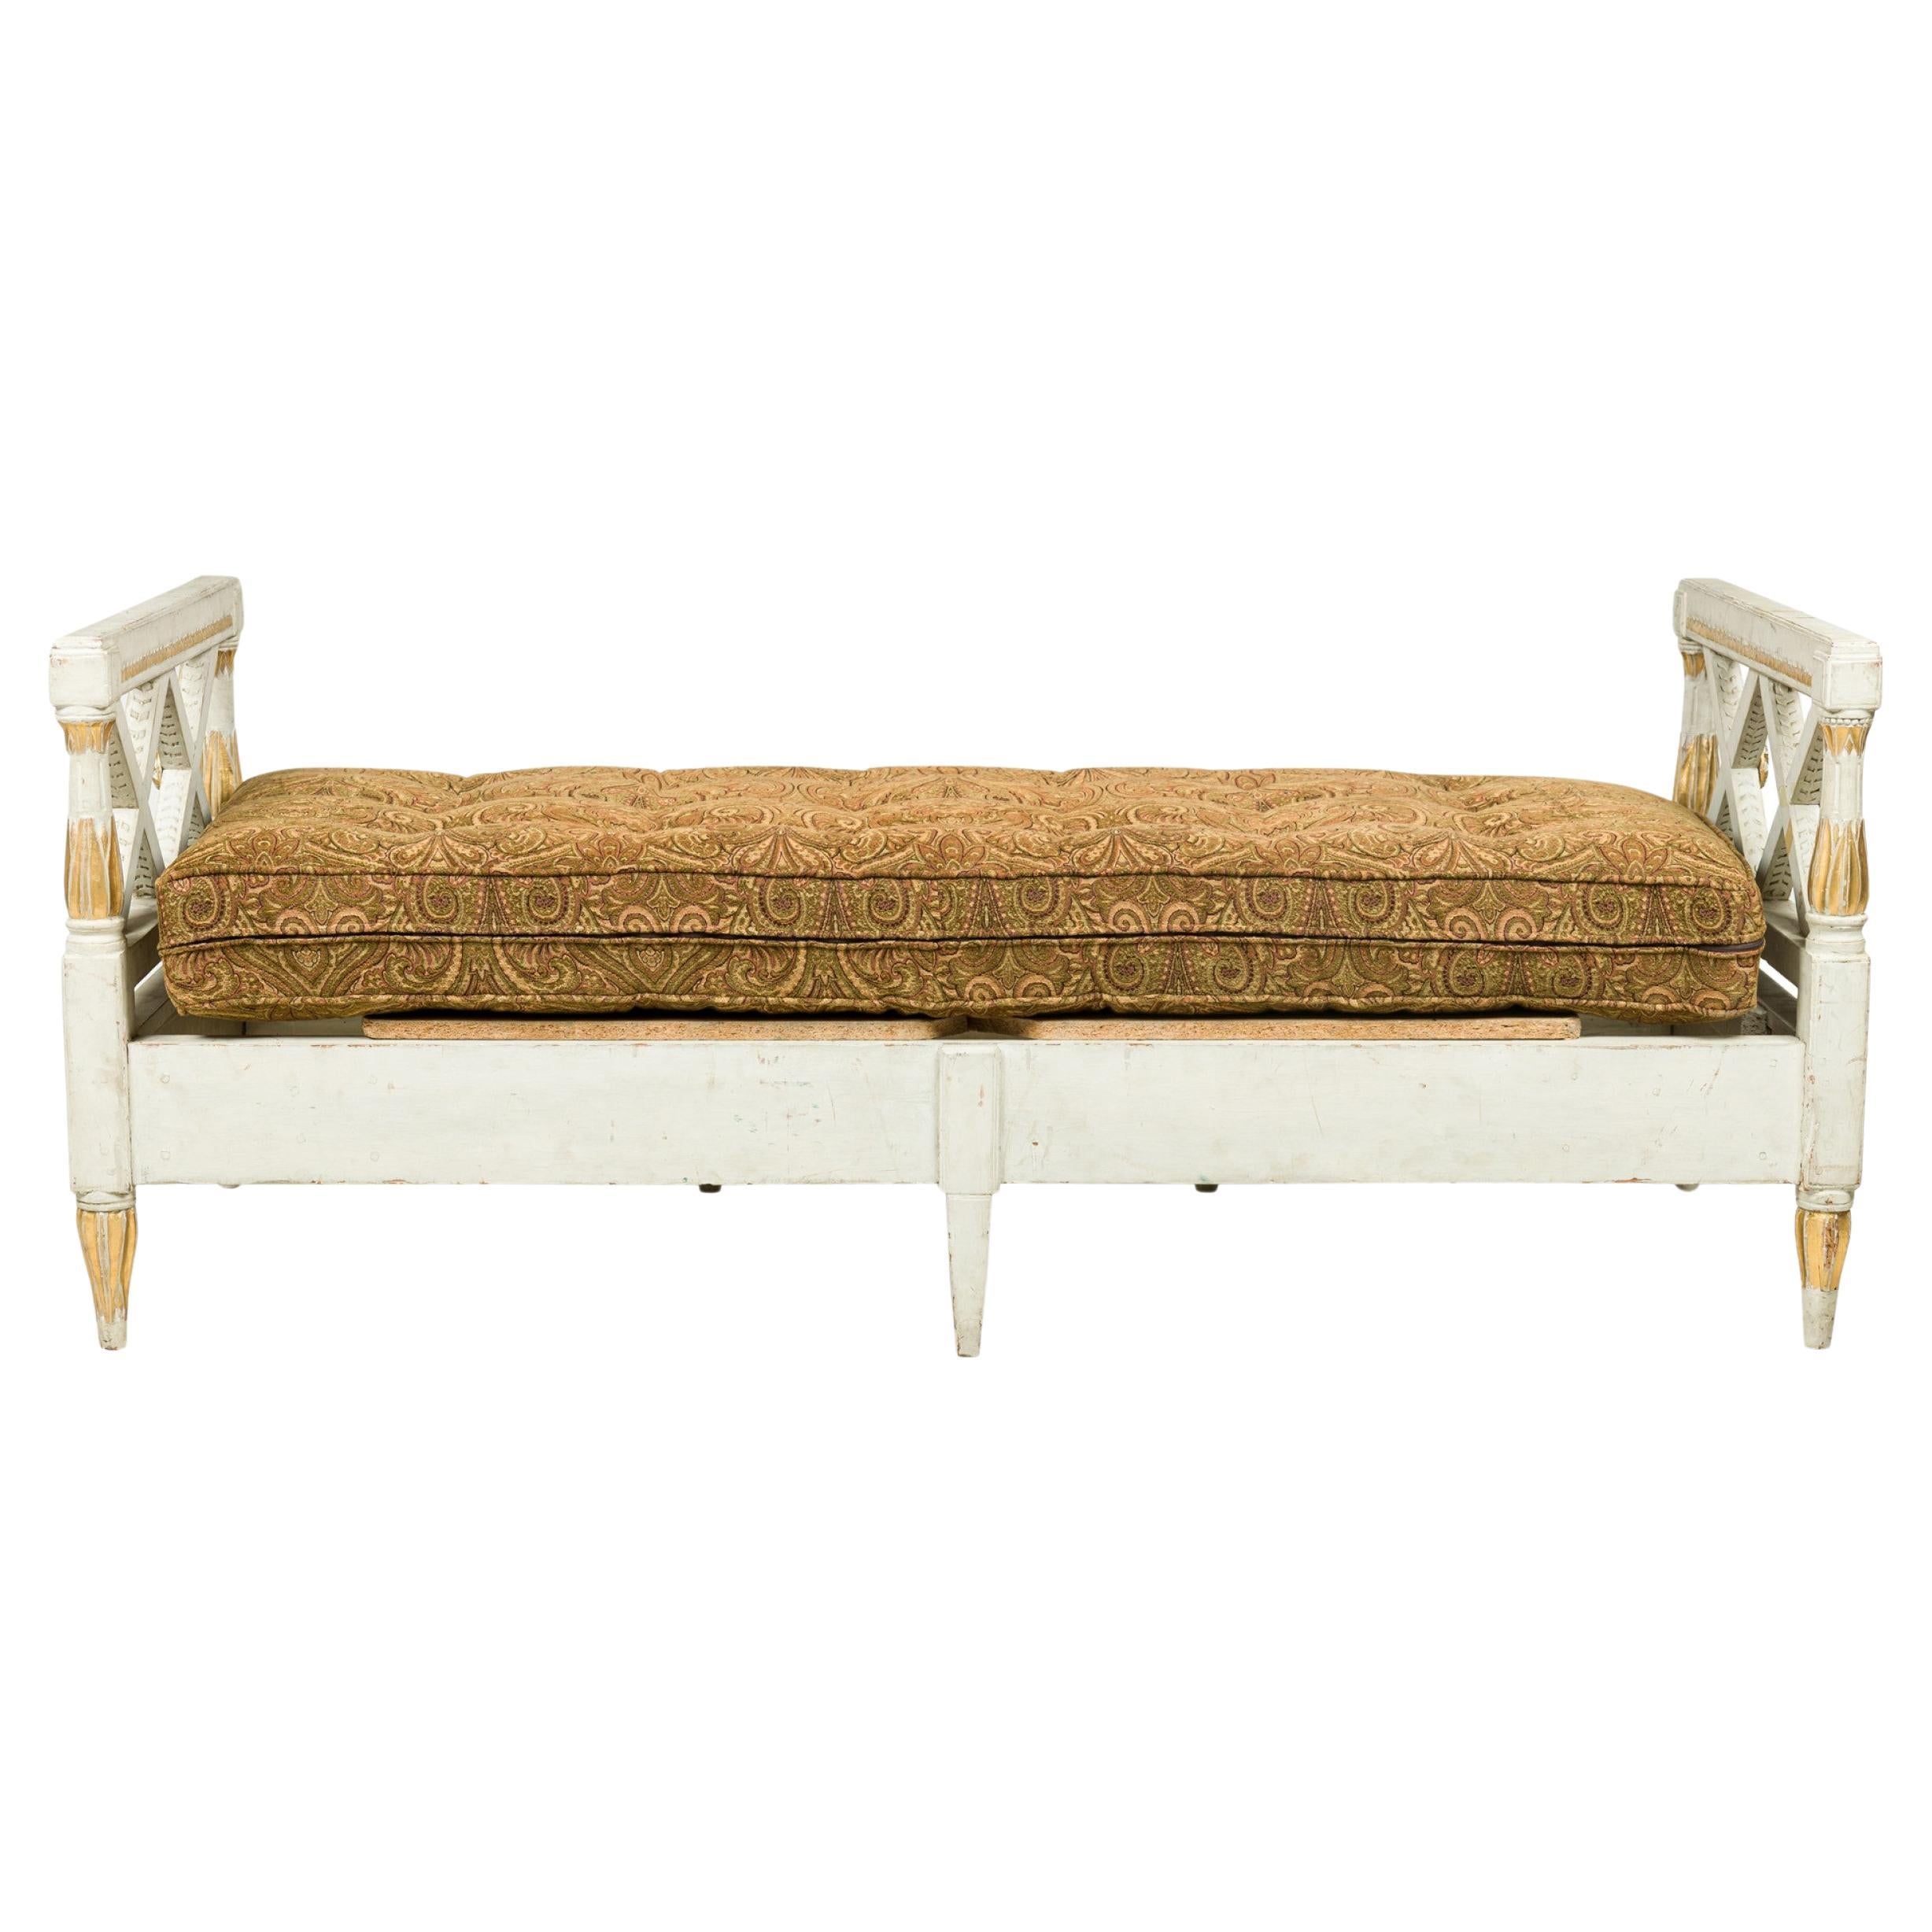 Swedish Neoclassic White and Gilt Painted DayBed